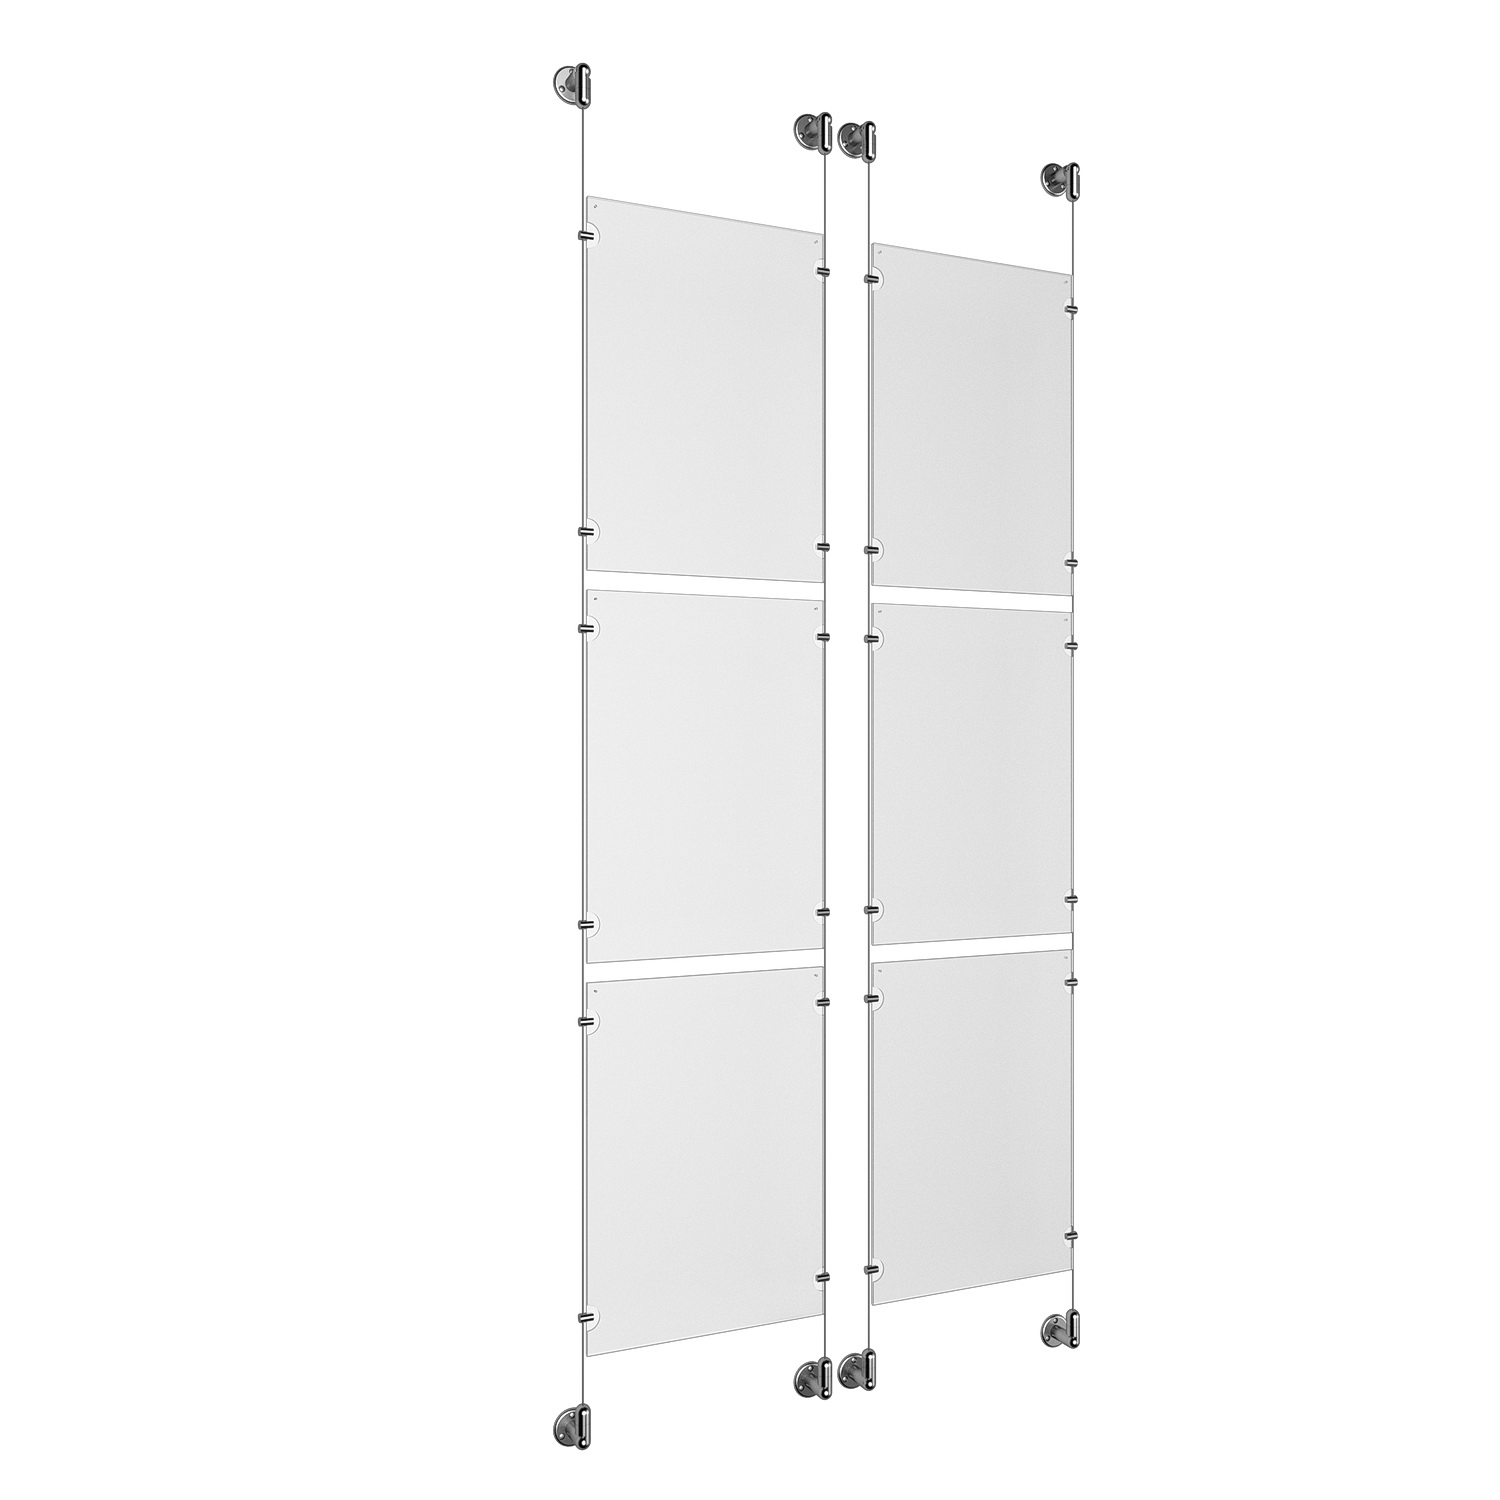 (6) 11'' Width x 17'' Height Clear Acrylic Frame & (4) Aluminum Clear Anodized Adjustable Angle Cable Systems with (24) Single-Sided Panel Grippers